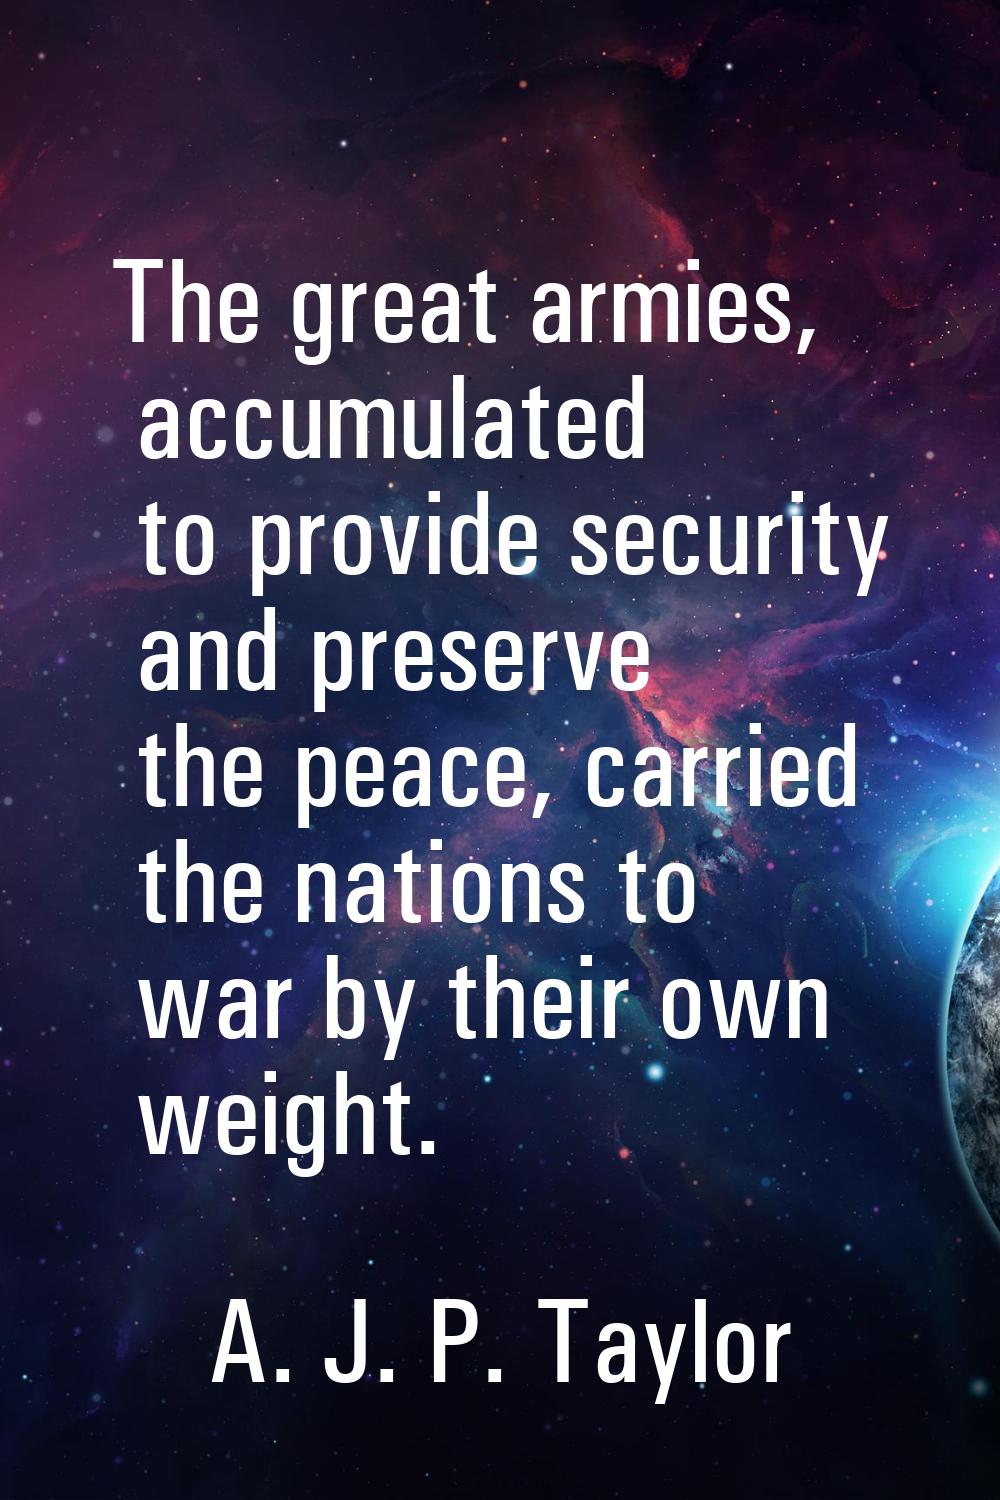 The great armies, accumulated to provide security and preserve the peace, carried the nations to wa